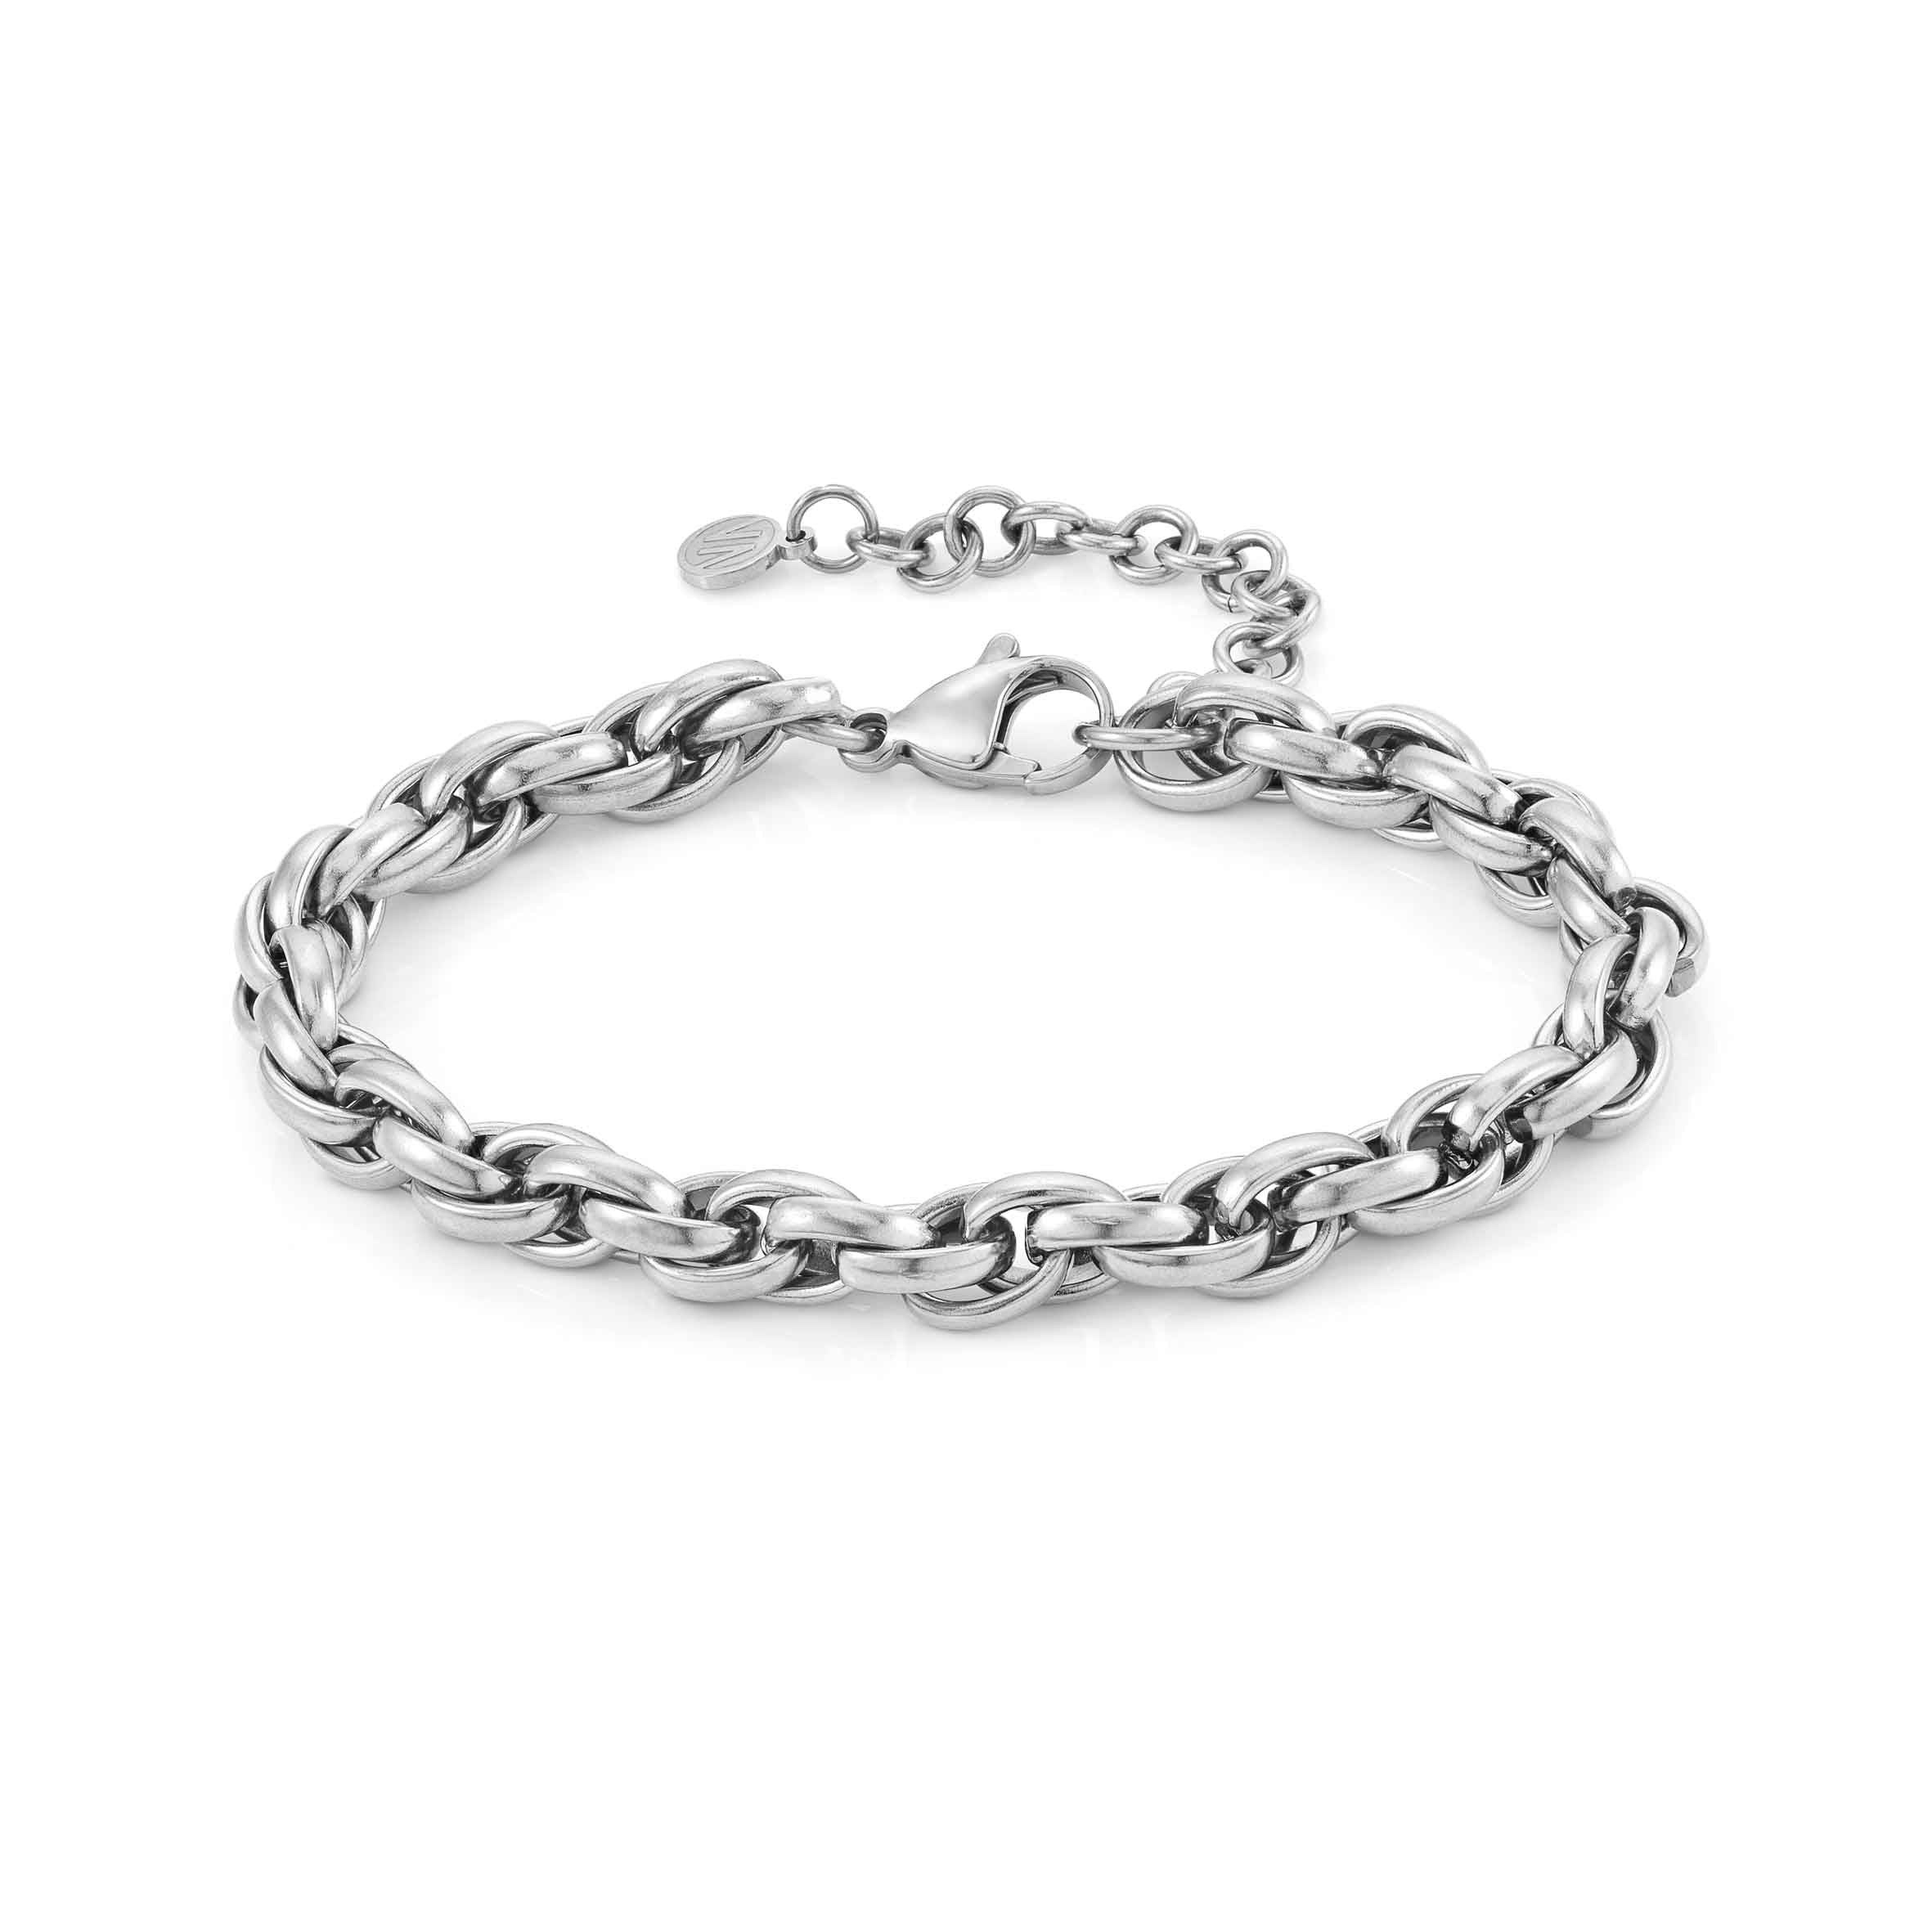 Nomination Beautifully Crafted Silhouette Bracelet